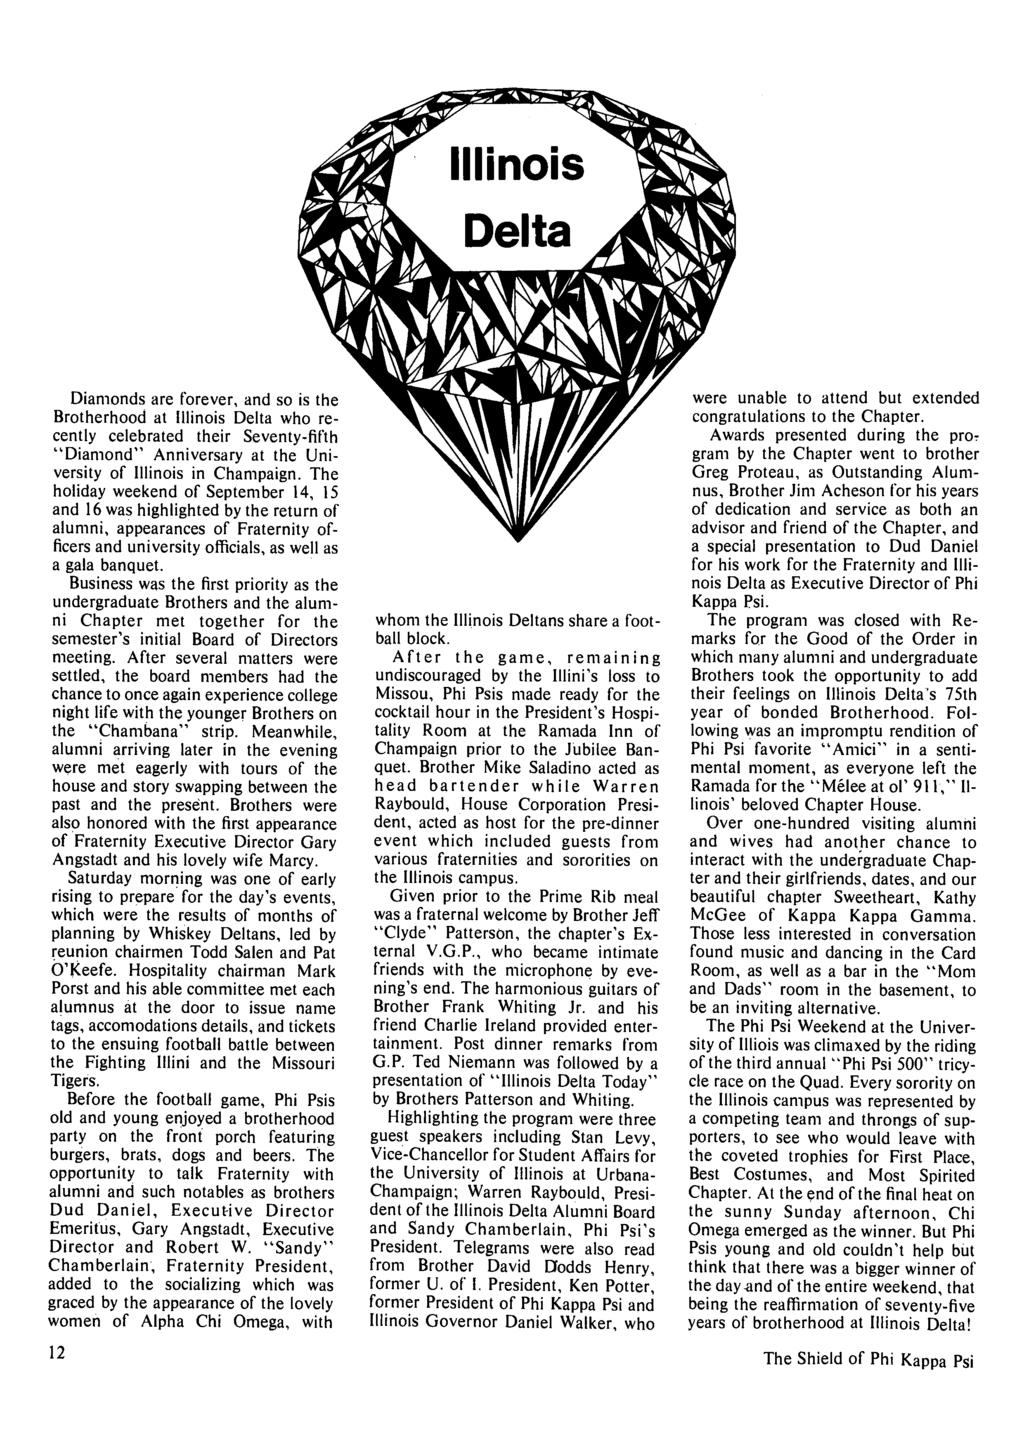 Diamonds are forever, and so is the Brotherhood at Illinois Delta who recently celebrated their Seventy-fifth "Diamond" Anniversary at the University of Illinois in Champaign.